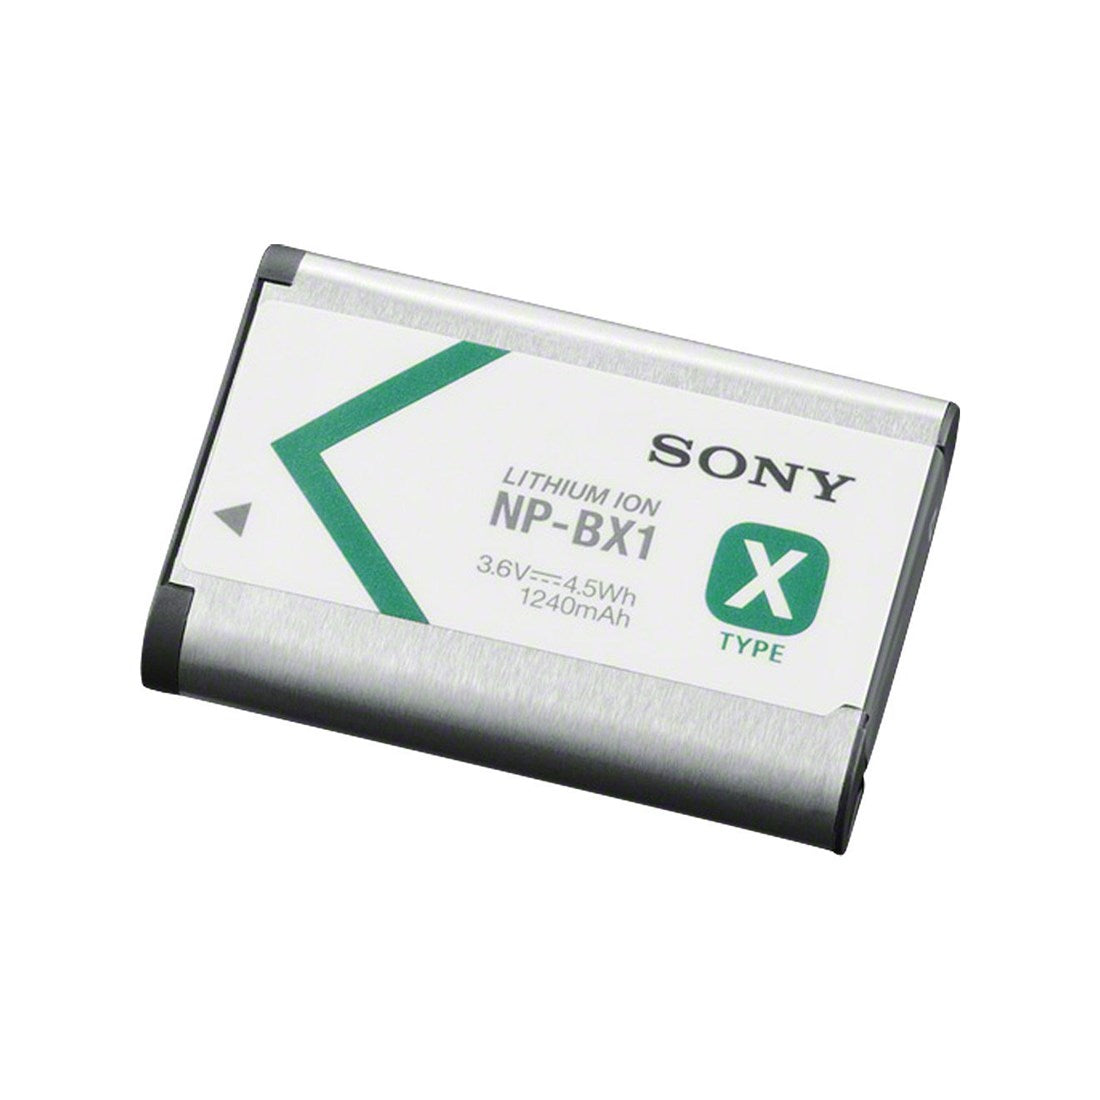 Sony NP-BX1 Rechargeable Camera Battery for RX100 RX1 ZV-1 HX400 HX90 - Product Photo 1 - Top down view of the battery unit